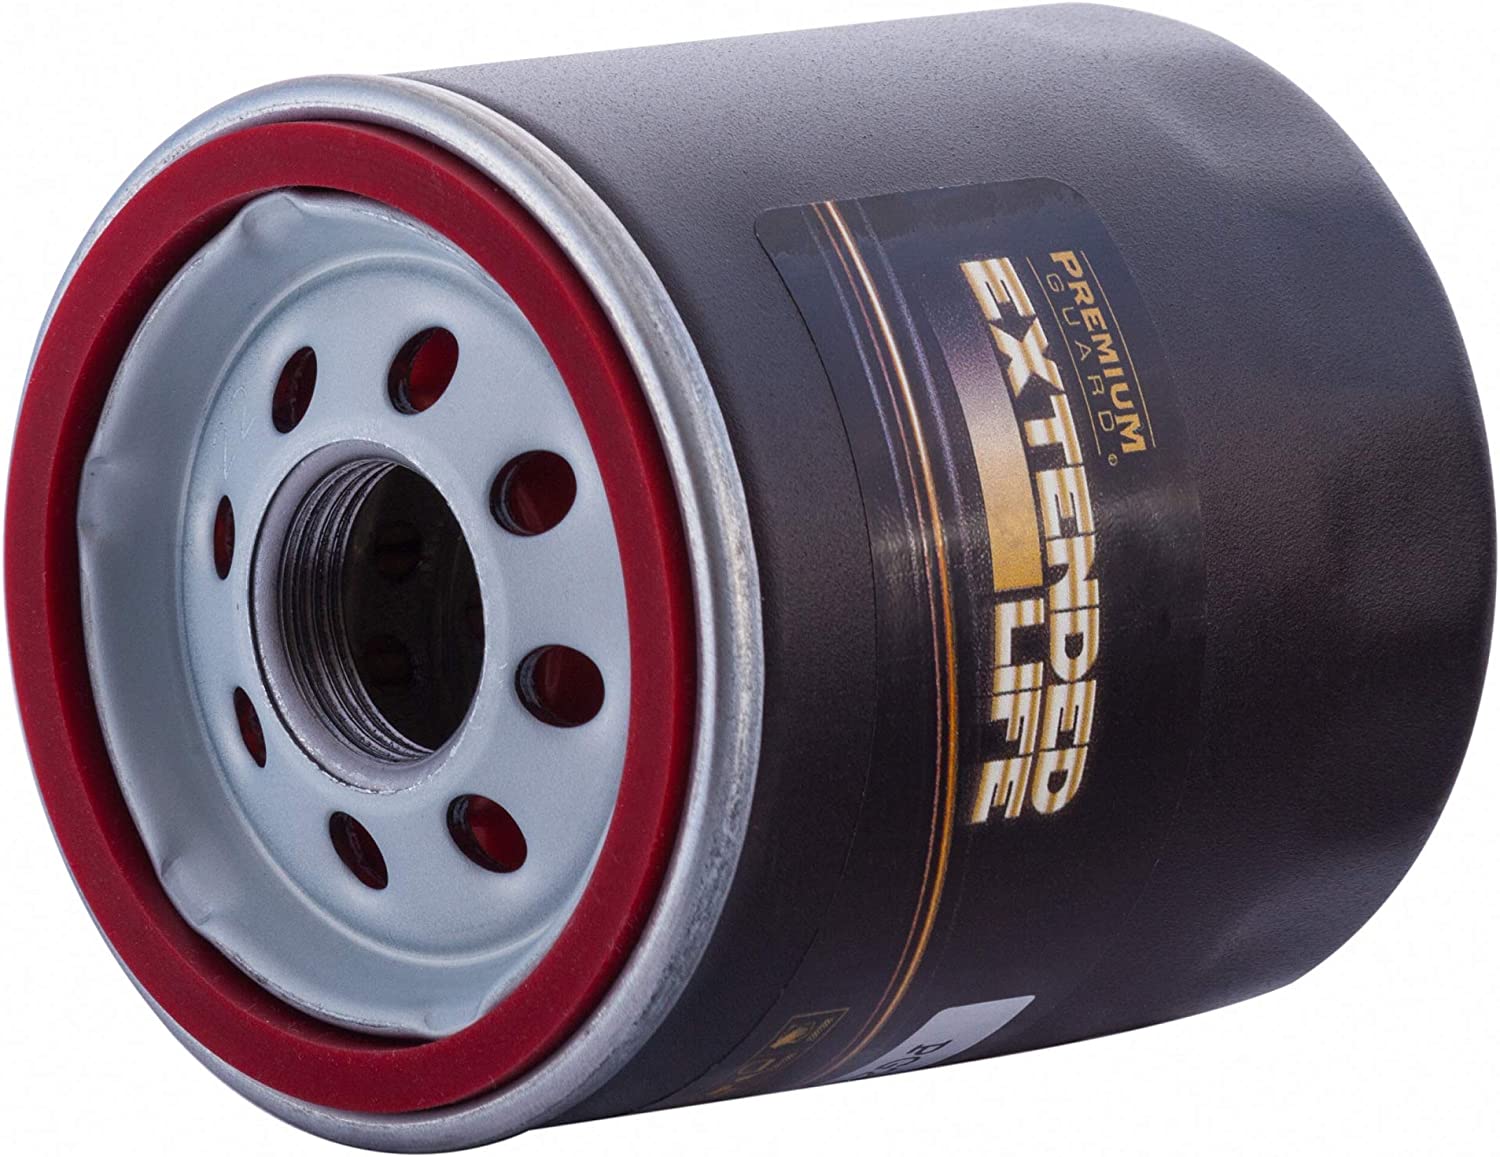 Premium PG2222EX Extended Life Oil Filter - image 5 of 5